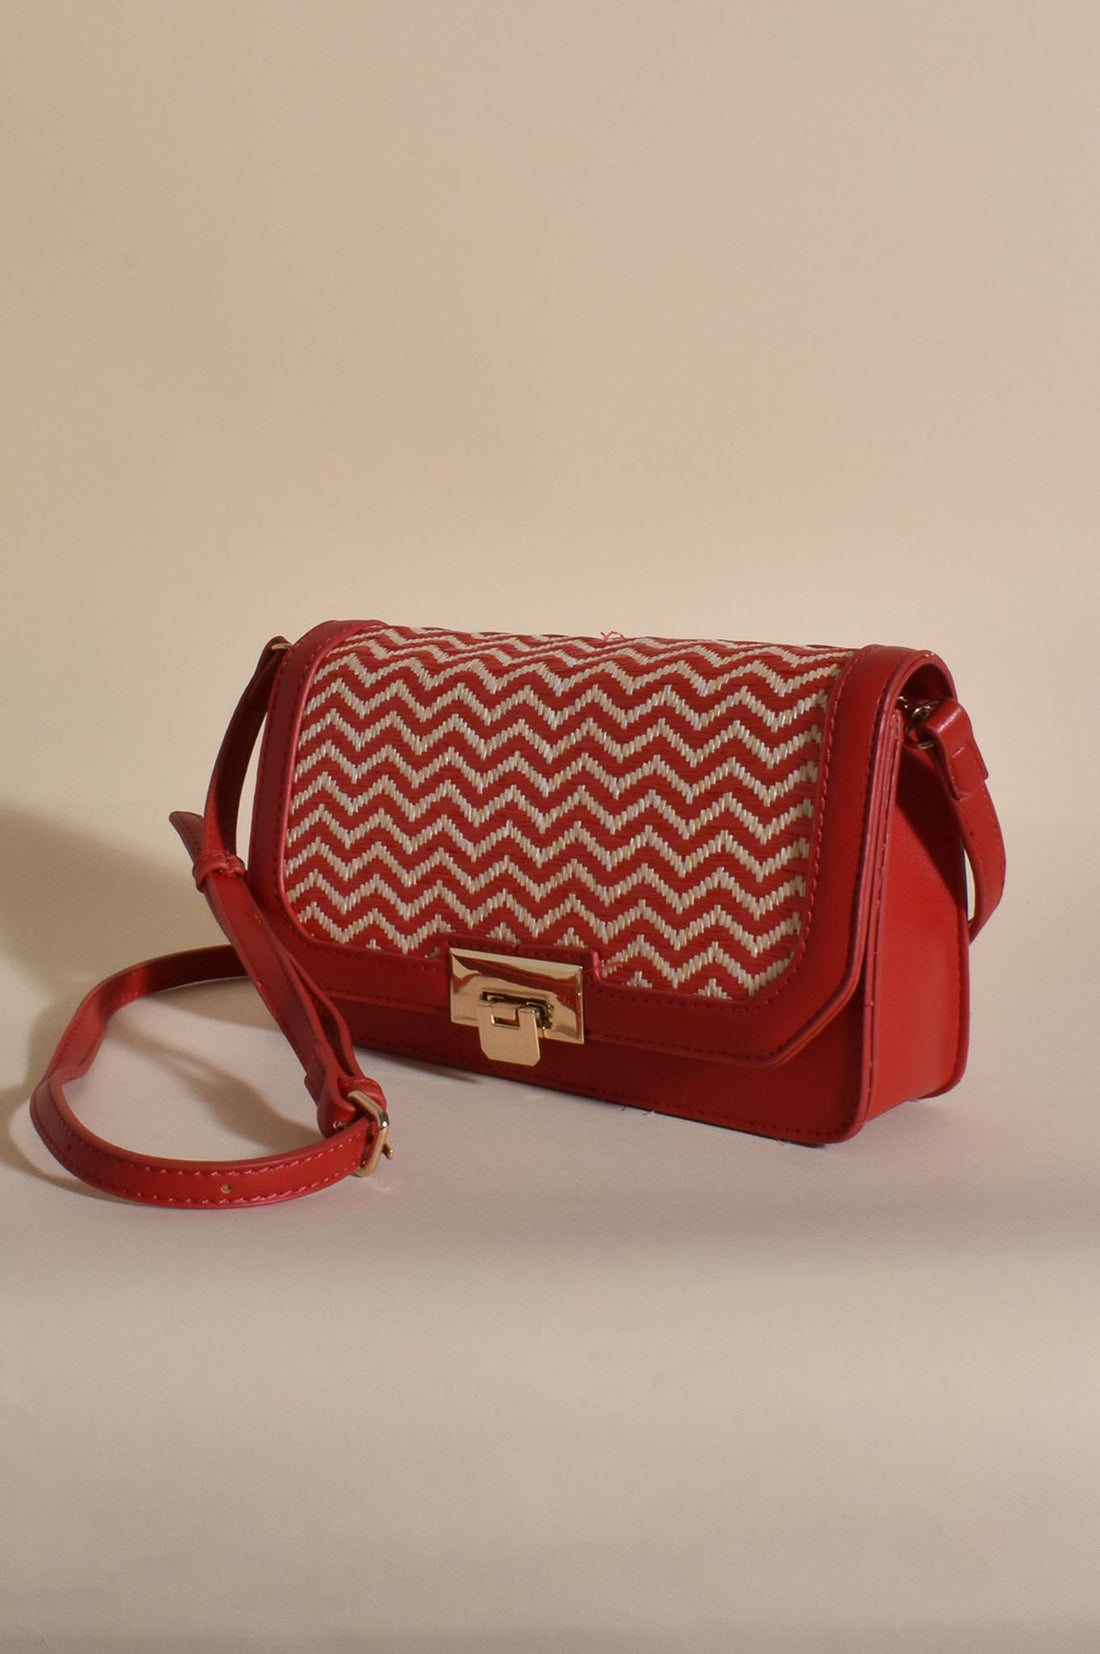 Reyna Event Bag - Red - FINAL SALE